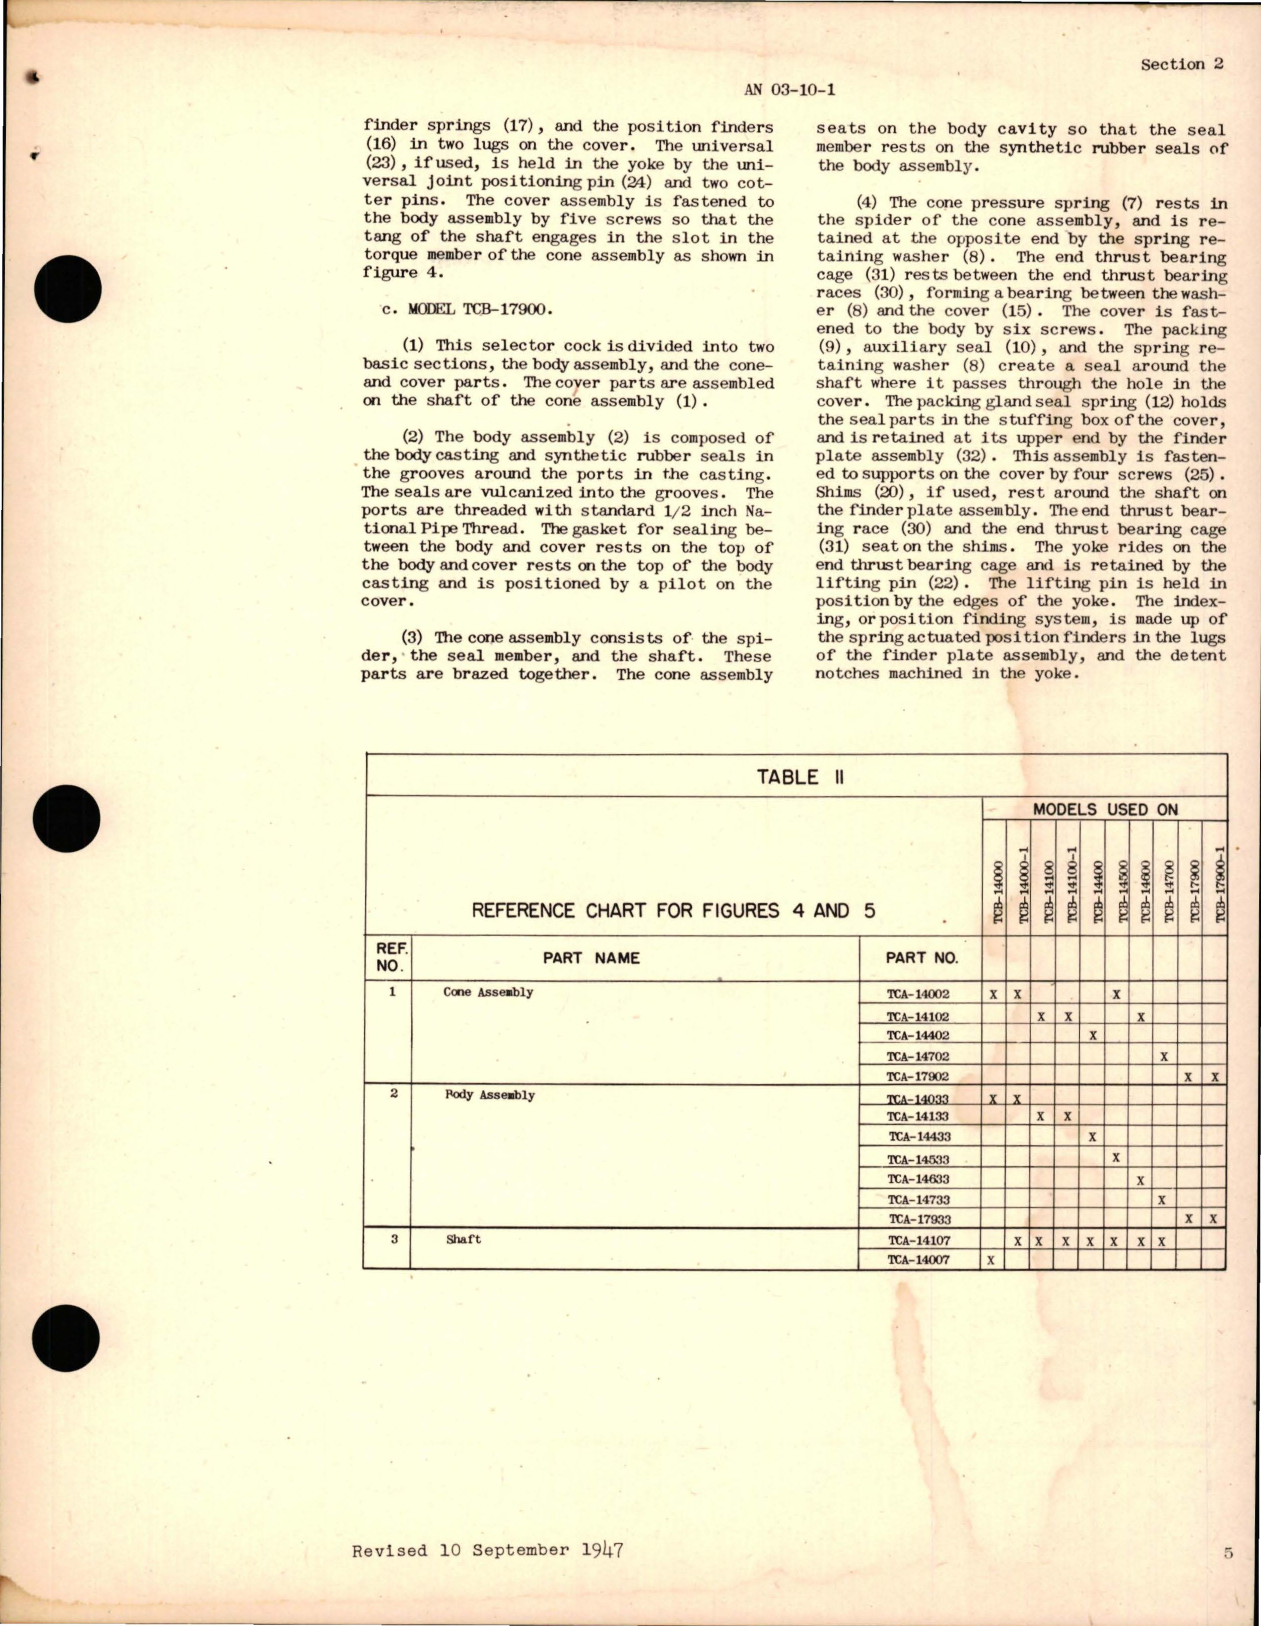 Sample page 9 from AirCorps Library document: Parts Catalog for Fuel Line Selector Cock